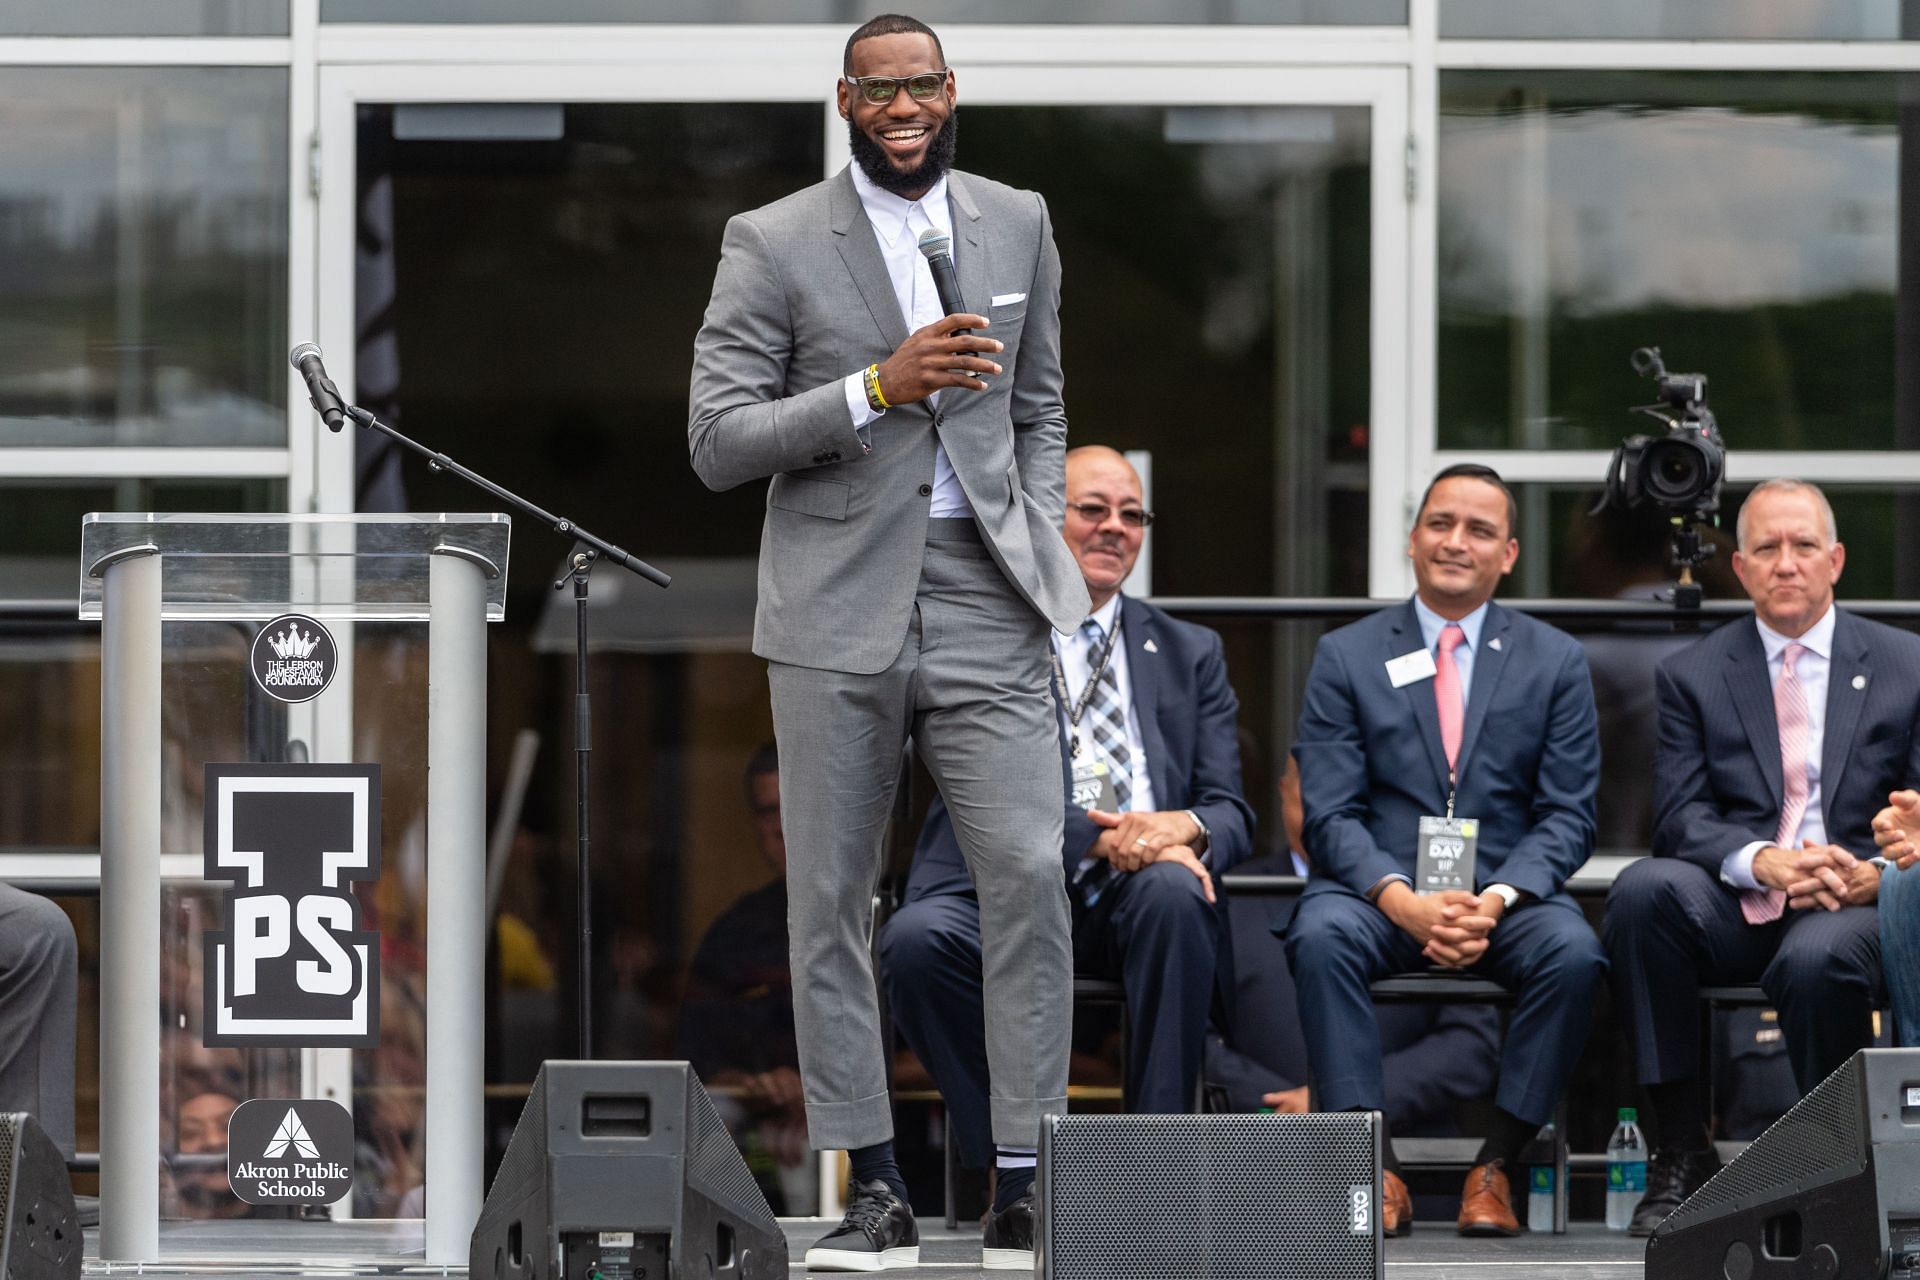 Shannon Sharpe believes that LeBron James&#039; tweet references that he is always criticized.